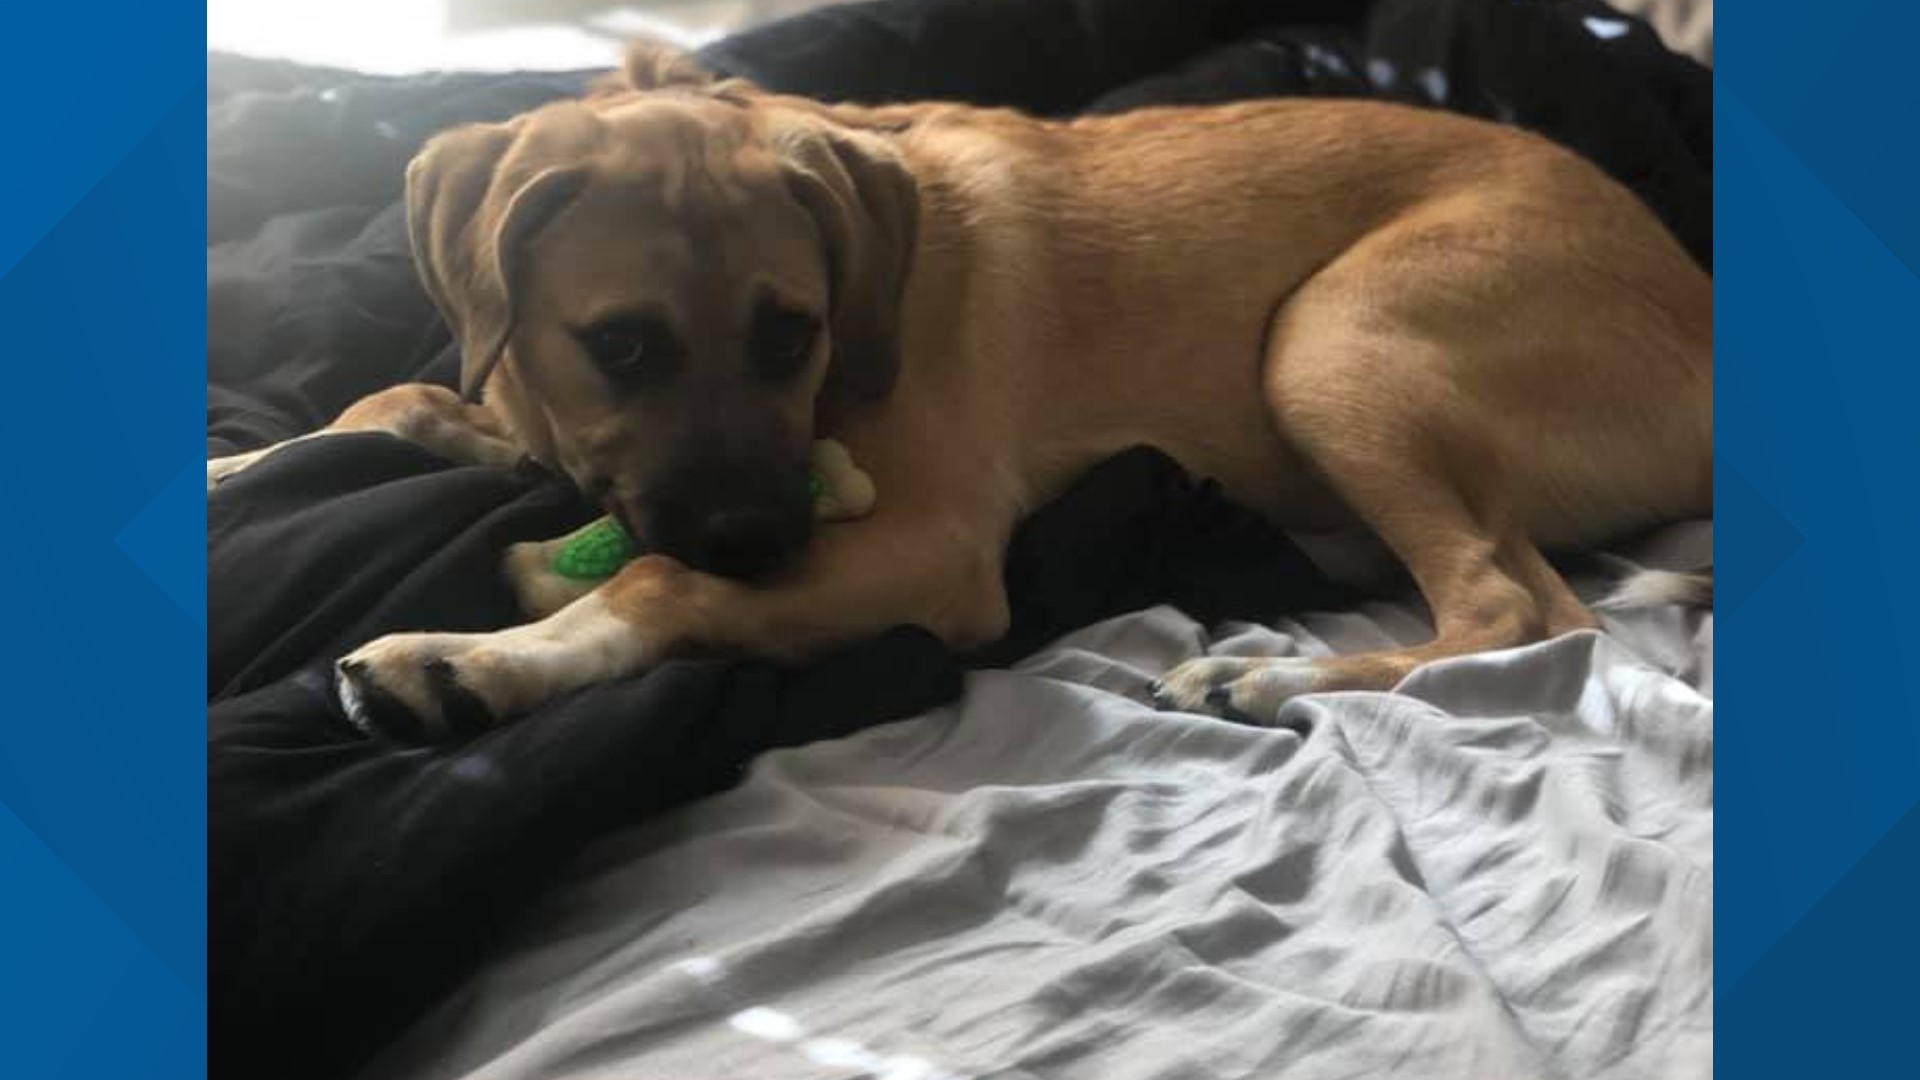 One woman, Delaney Presley of Belton, said her six-month-old puppy played in the water and died 30 minutes from the time the water entered his bloodstream.